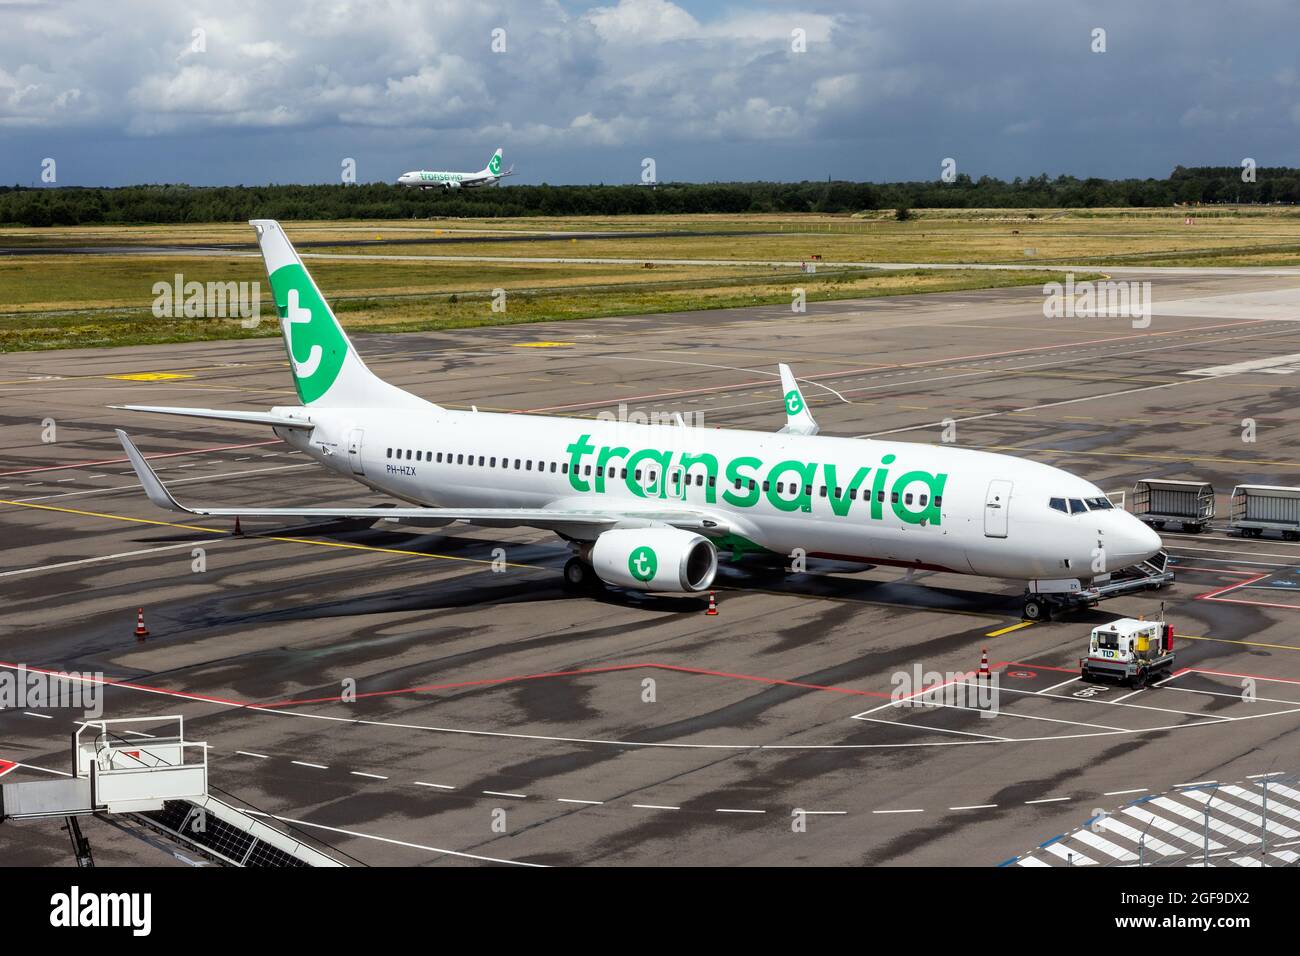 Transavia Boeing 737 passenger planes at the terminal and landing at Eindhoven Airport. The Netherlands - July 6, 2020 Stock Photo